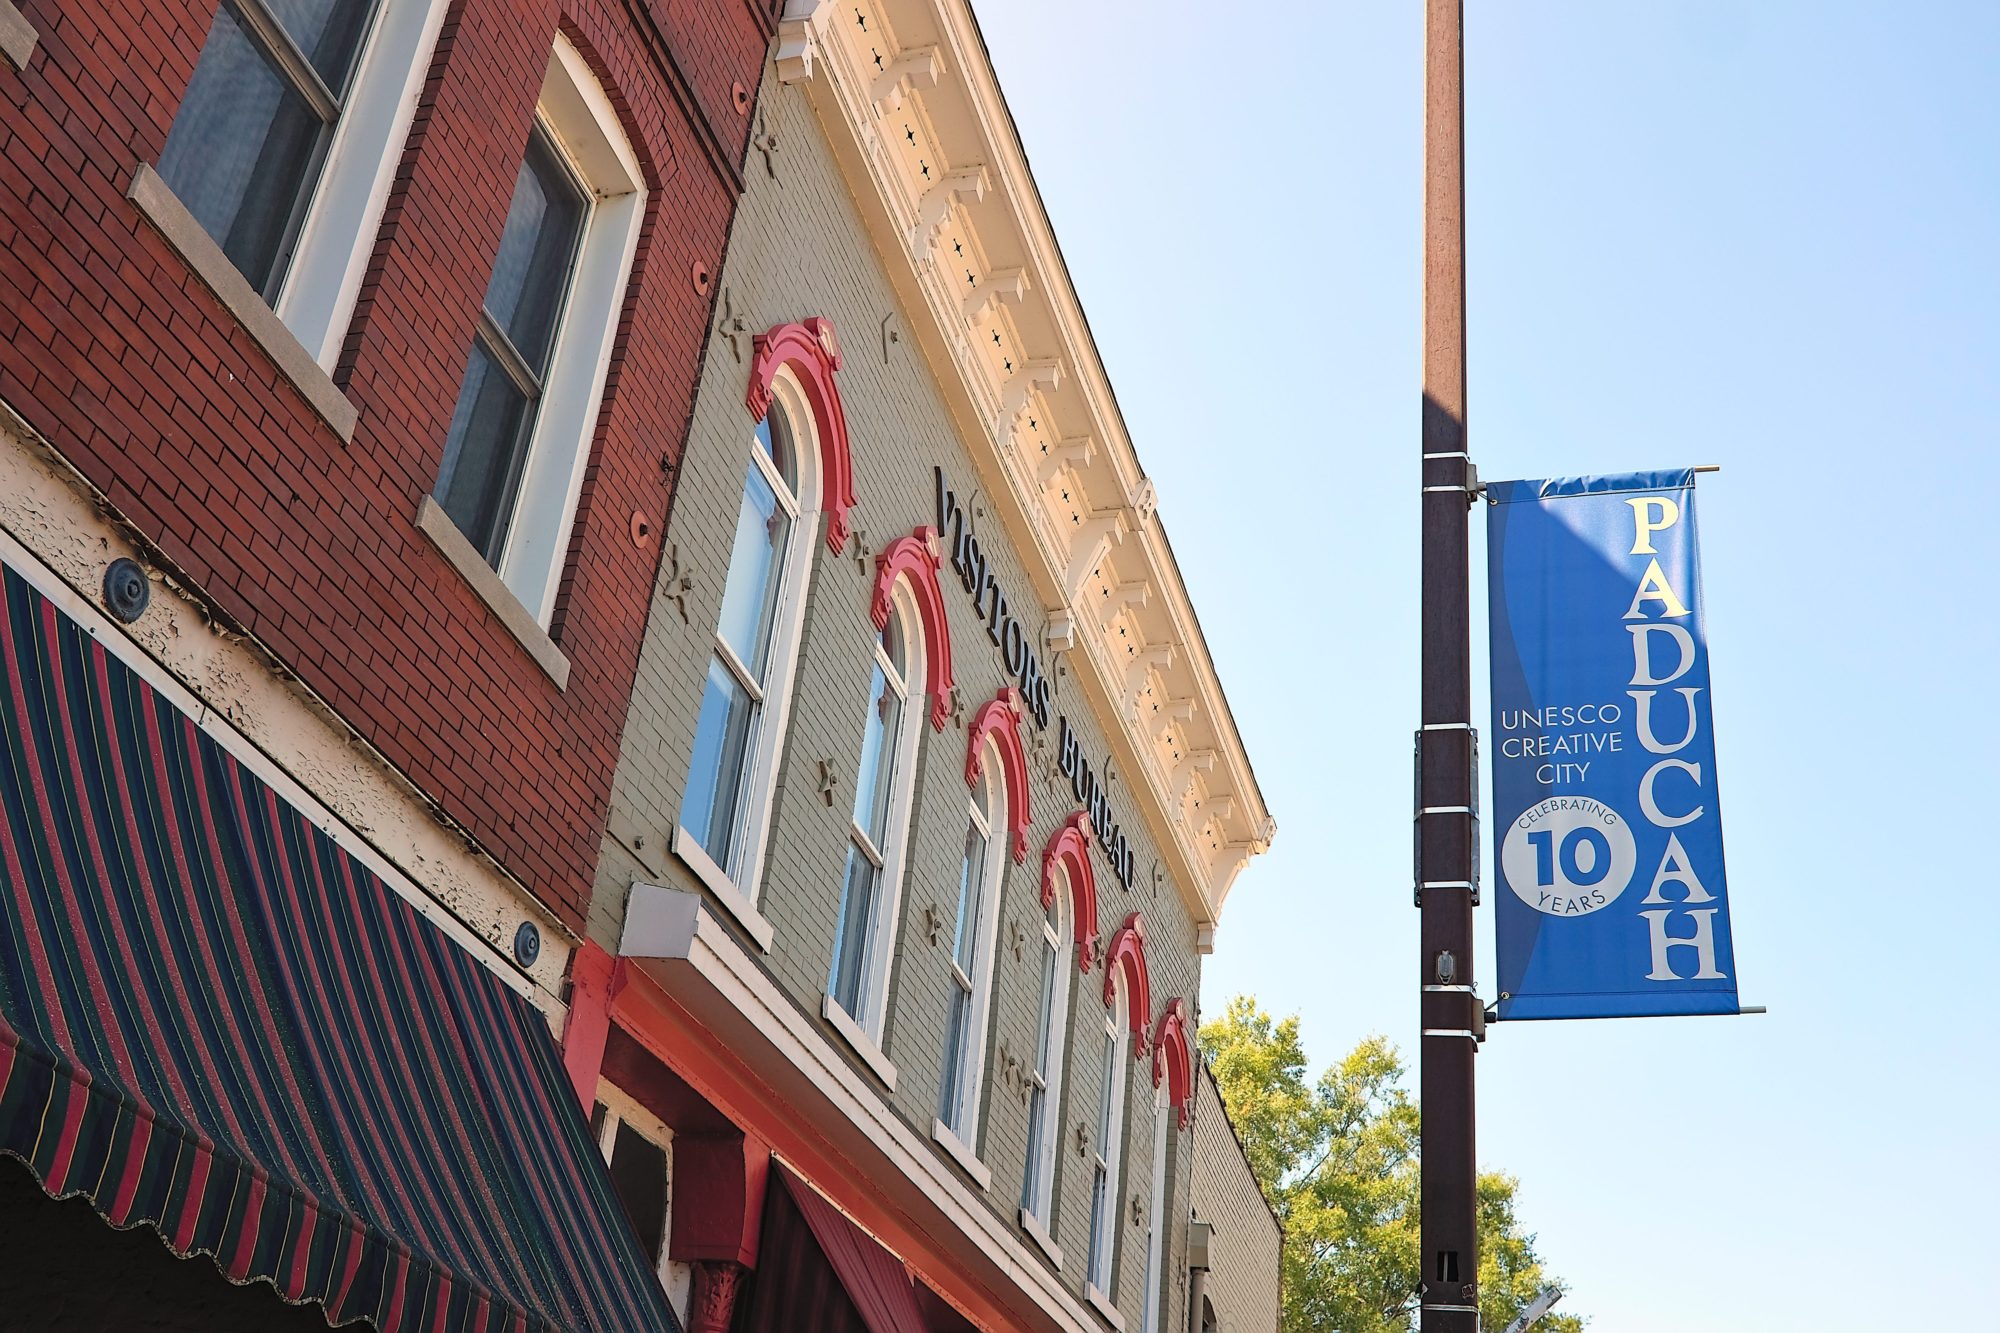 Image of the Paducah Visitors Bureau and a banner for 10 years as a UNESCO Creative City